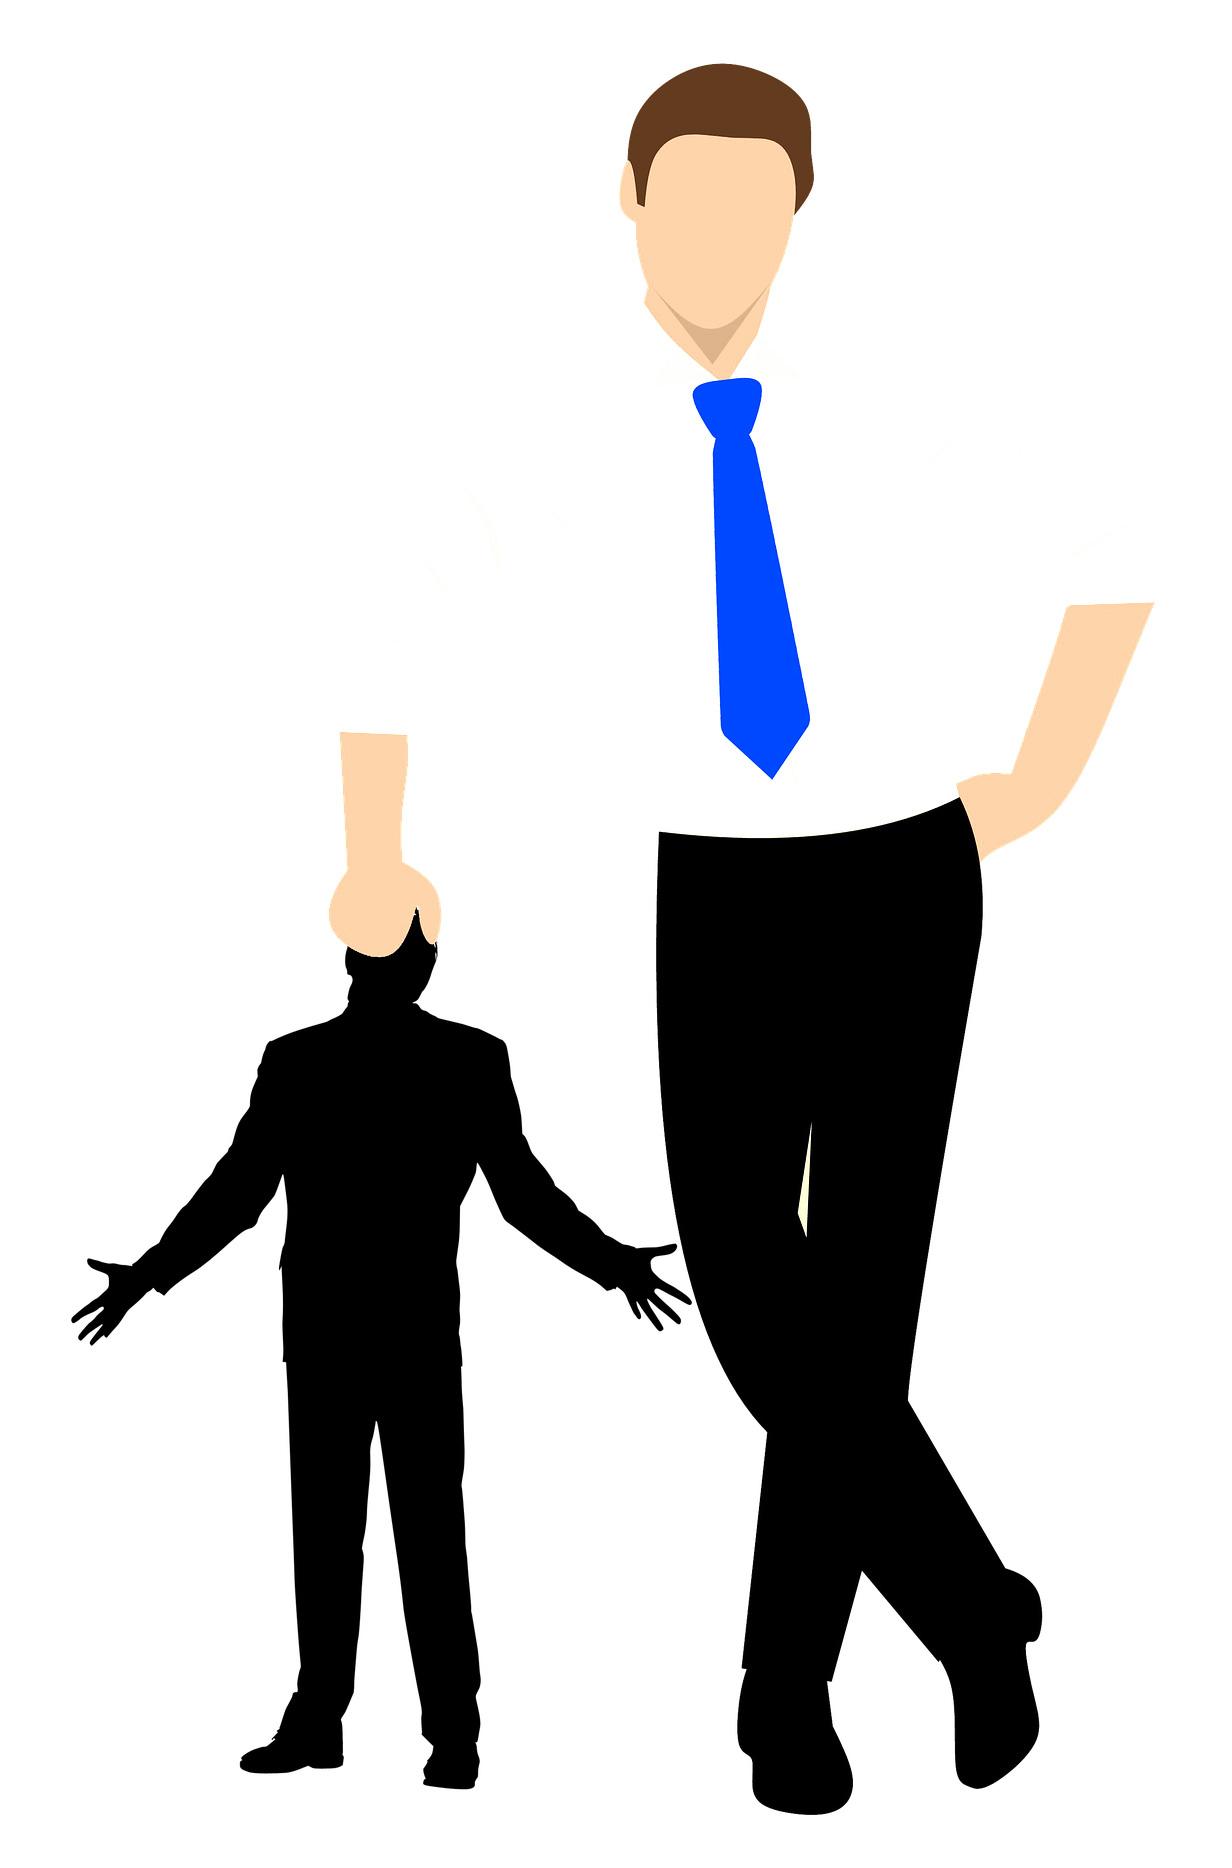 A person in a suit leaning on a sillouette representation of a subordinate